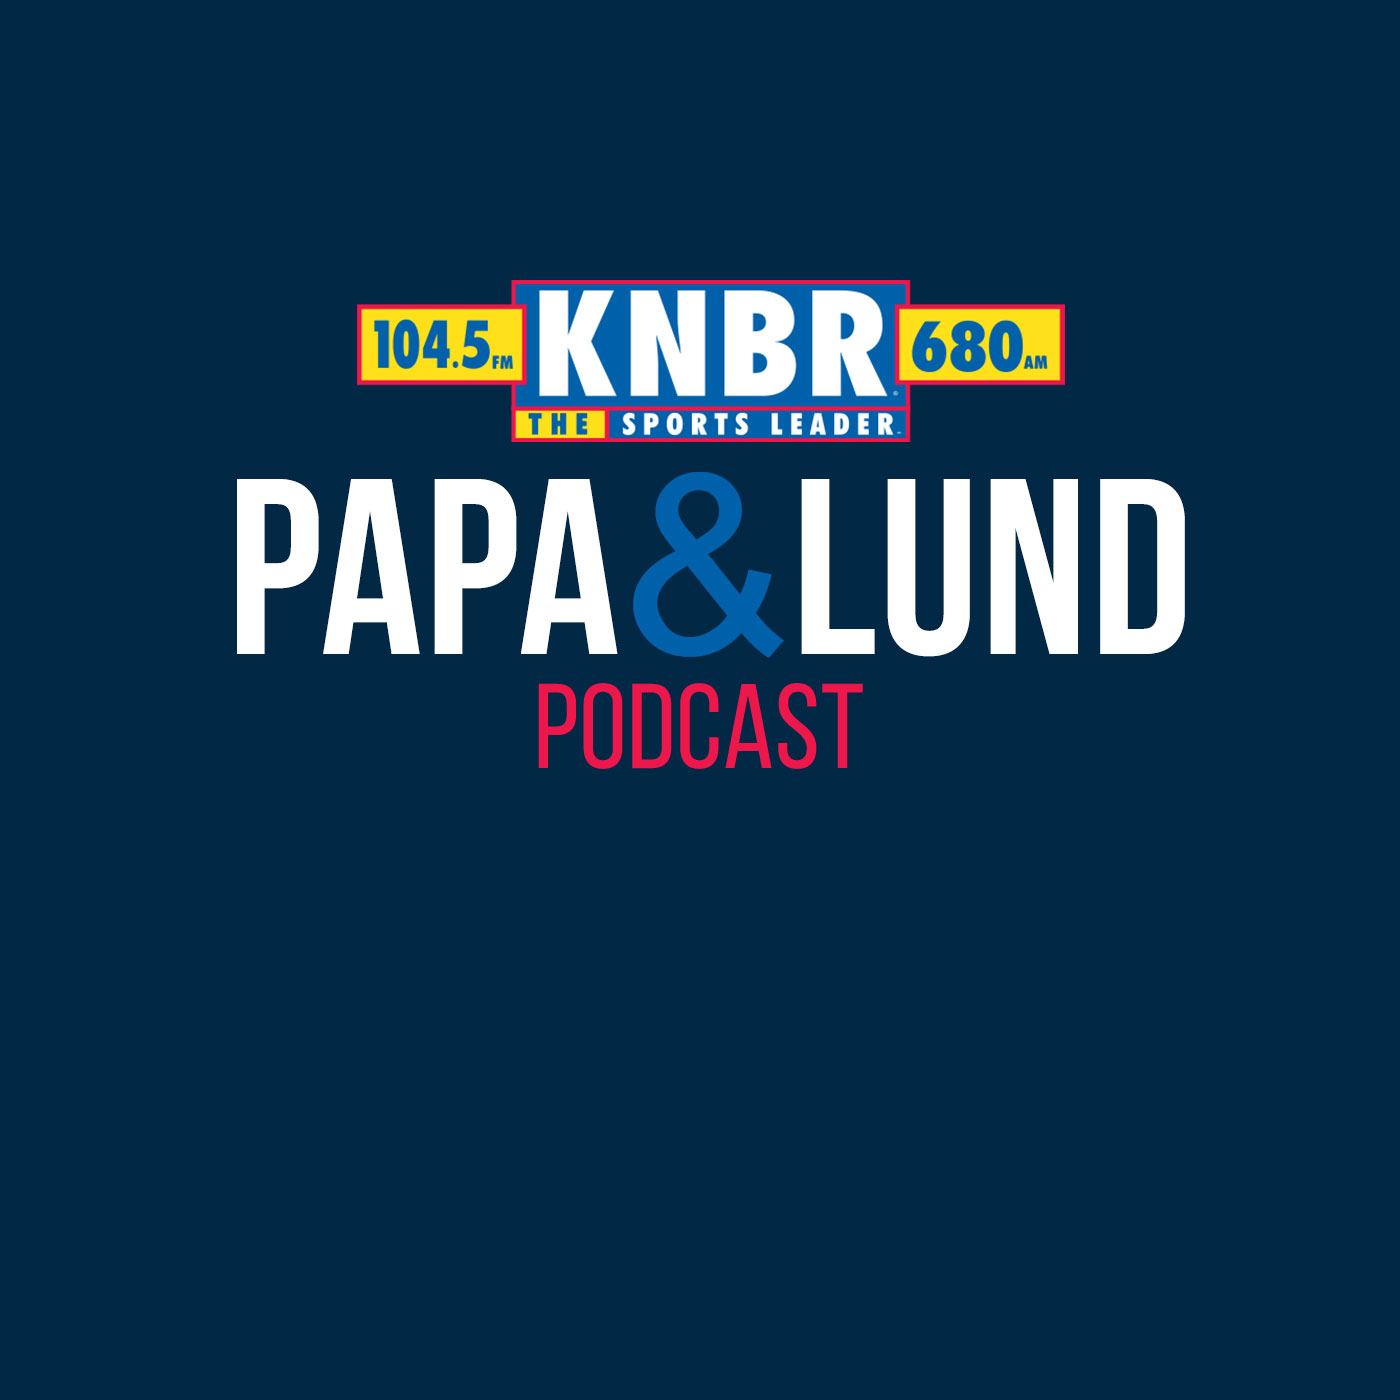 5-18 Zach Harper joins Papa & Lund to discuss the NBA playoffs as well as how to fix the Warriors this offseason